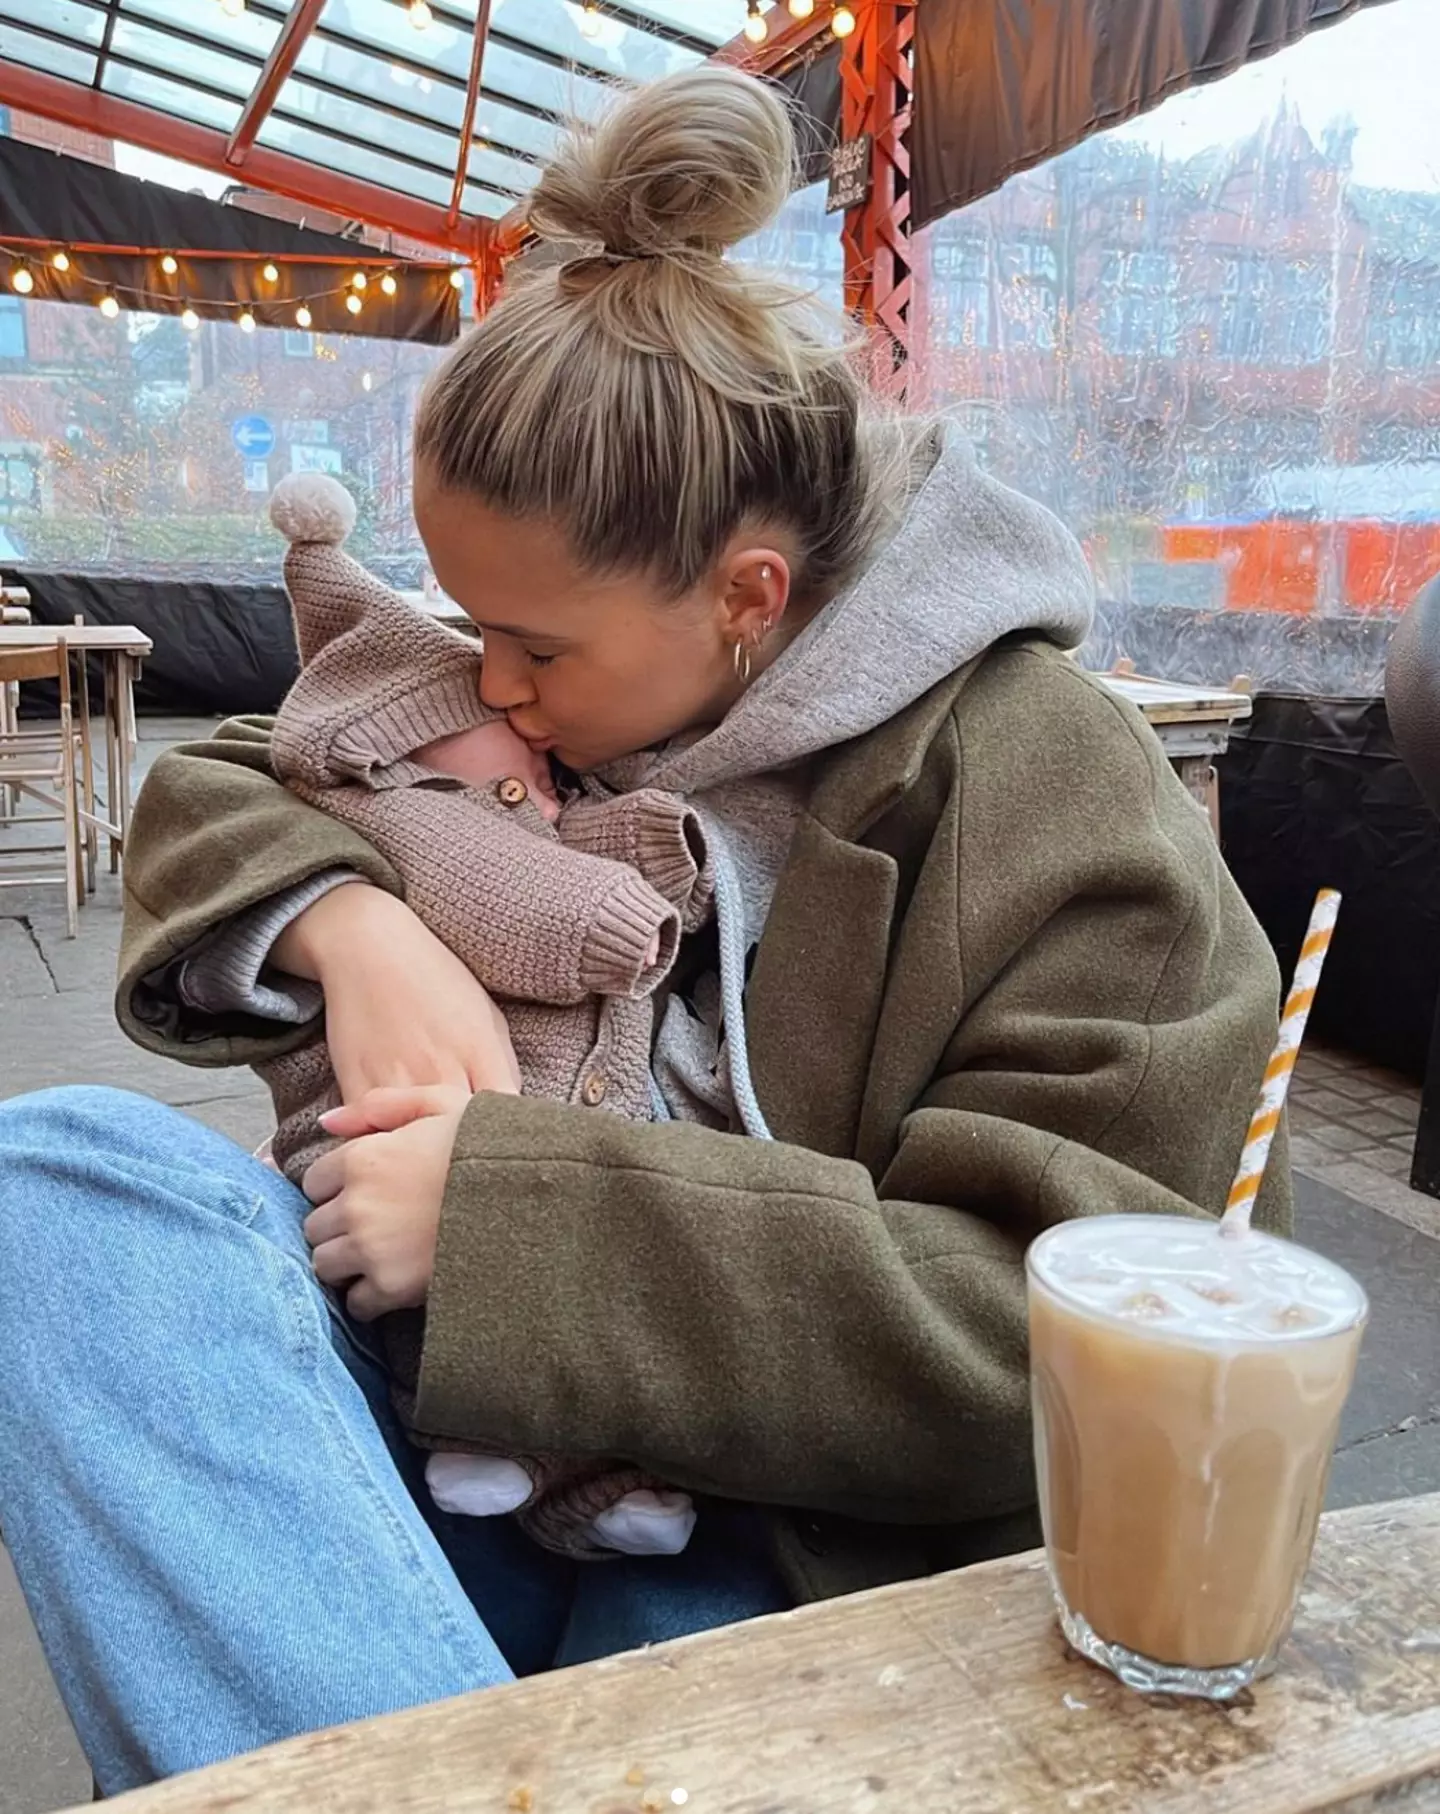 Molly shared a sweet photo of herself and Bambi on a cute day out.